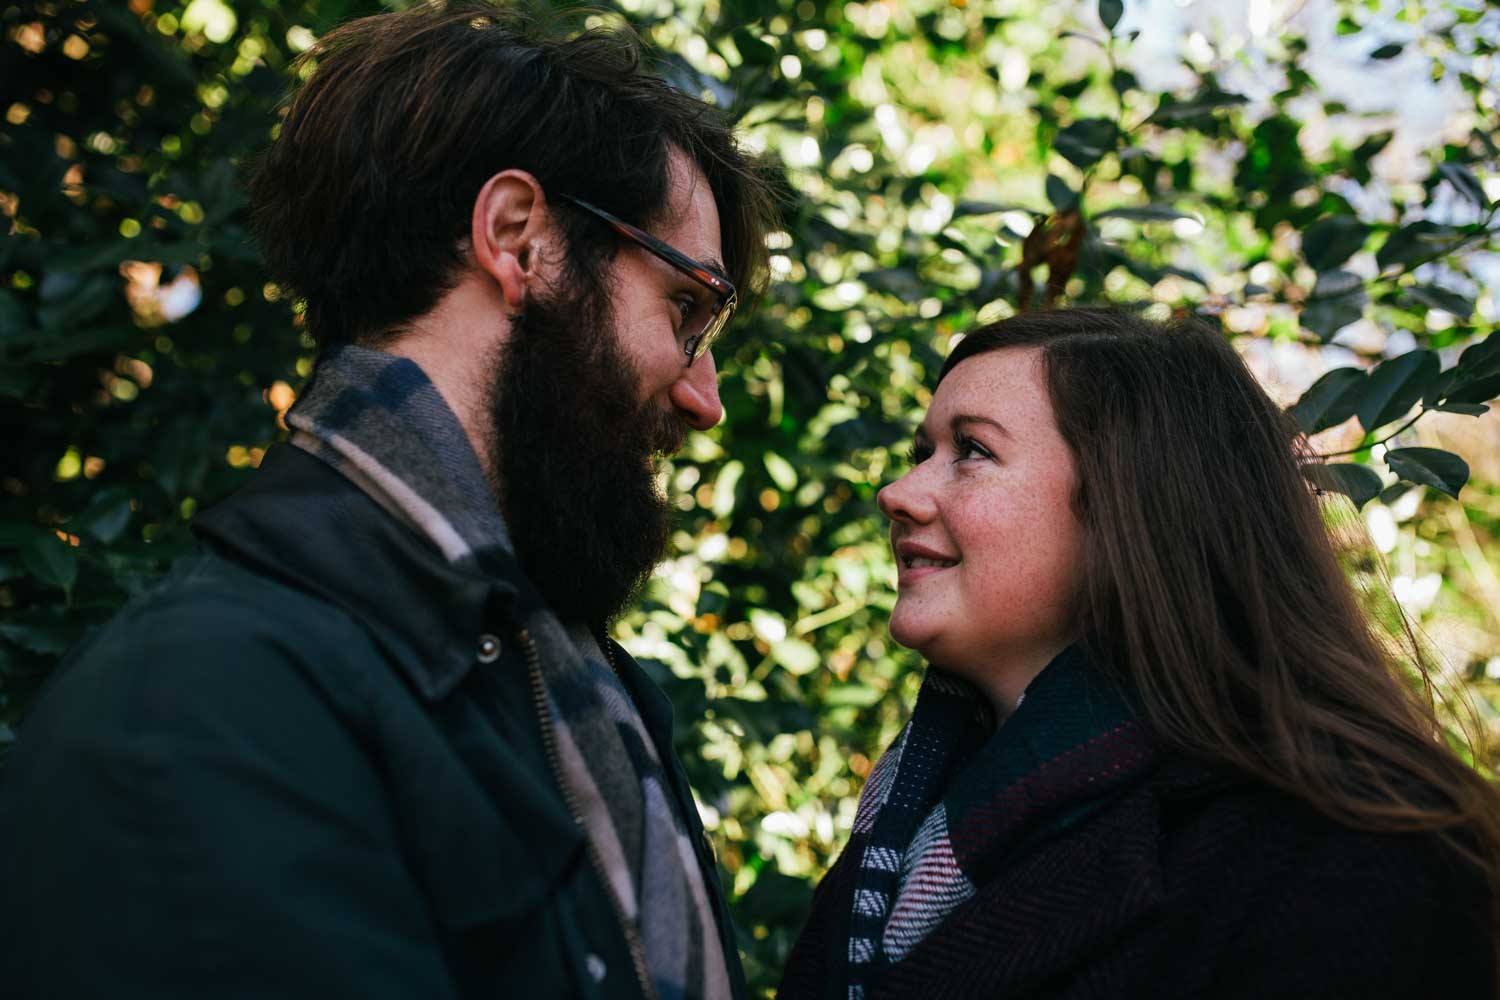 leafy backdrop for couples engagement shoot in suffolk